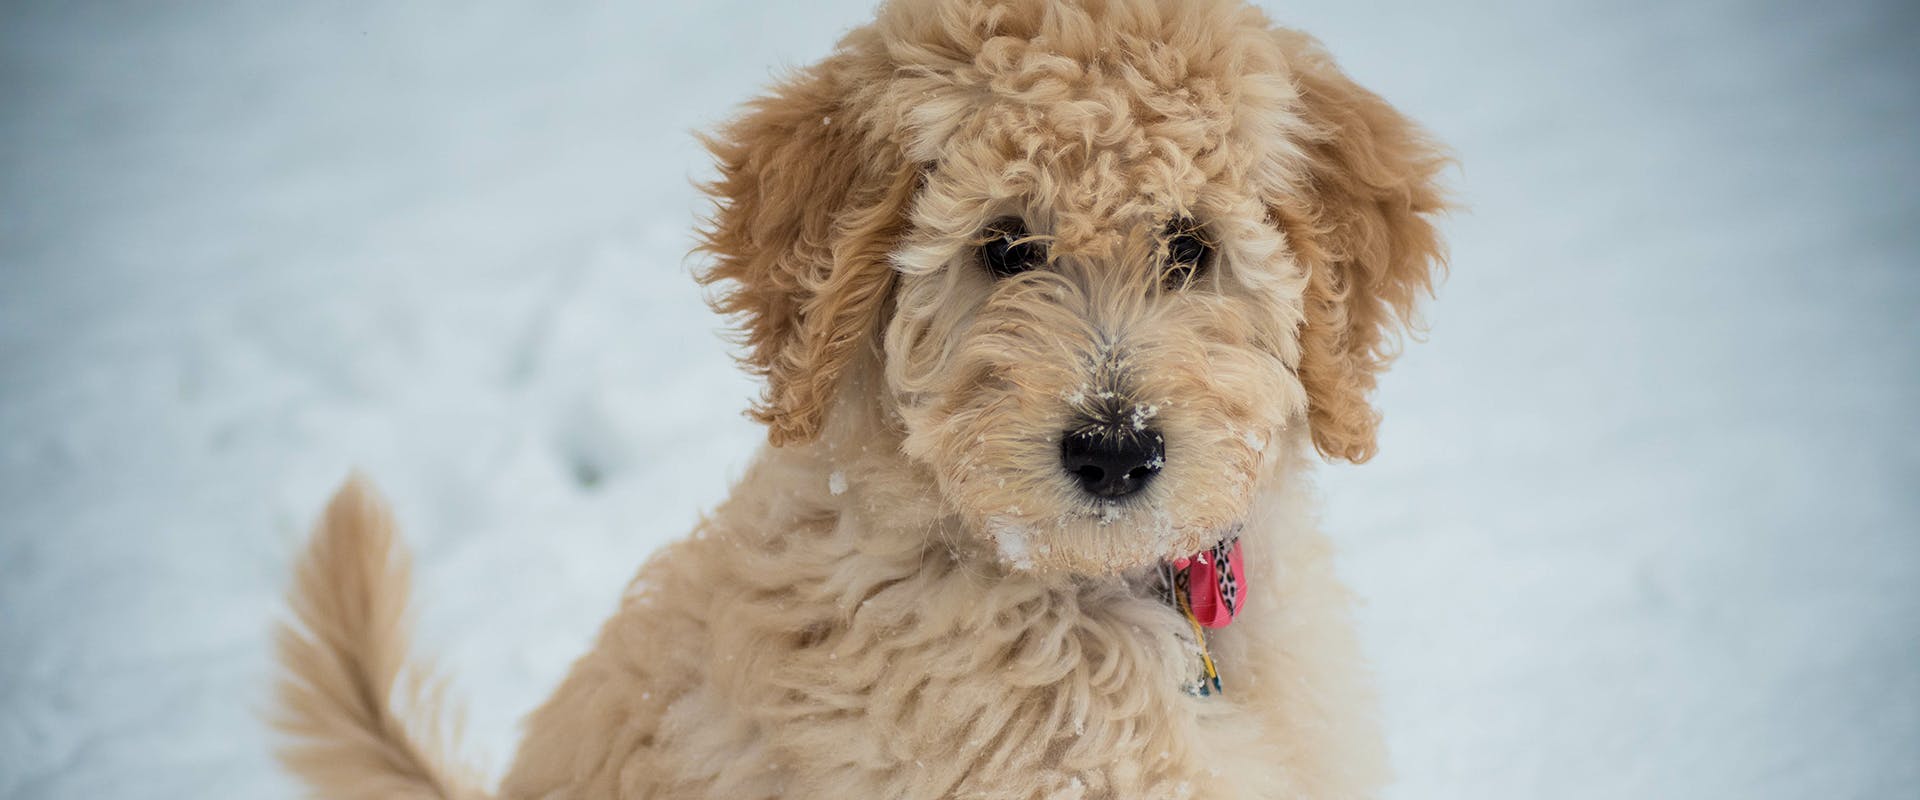 A cute Poochon puppy standing in the snow, a few snowflakes on its nose